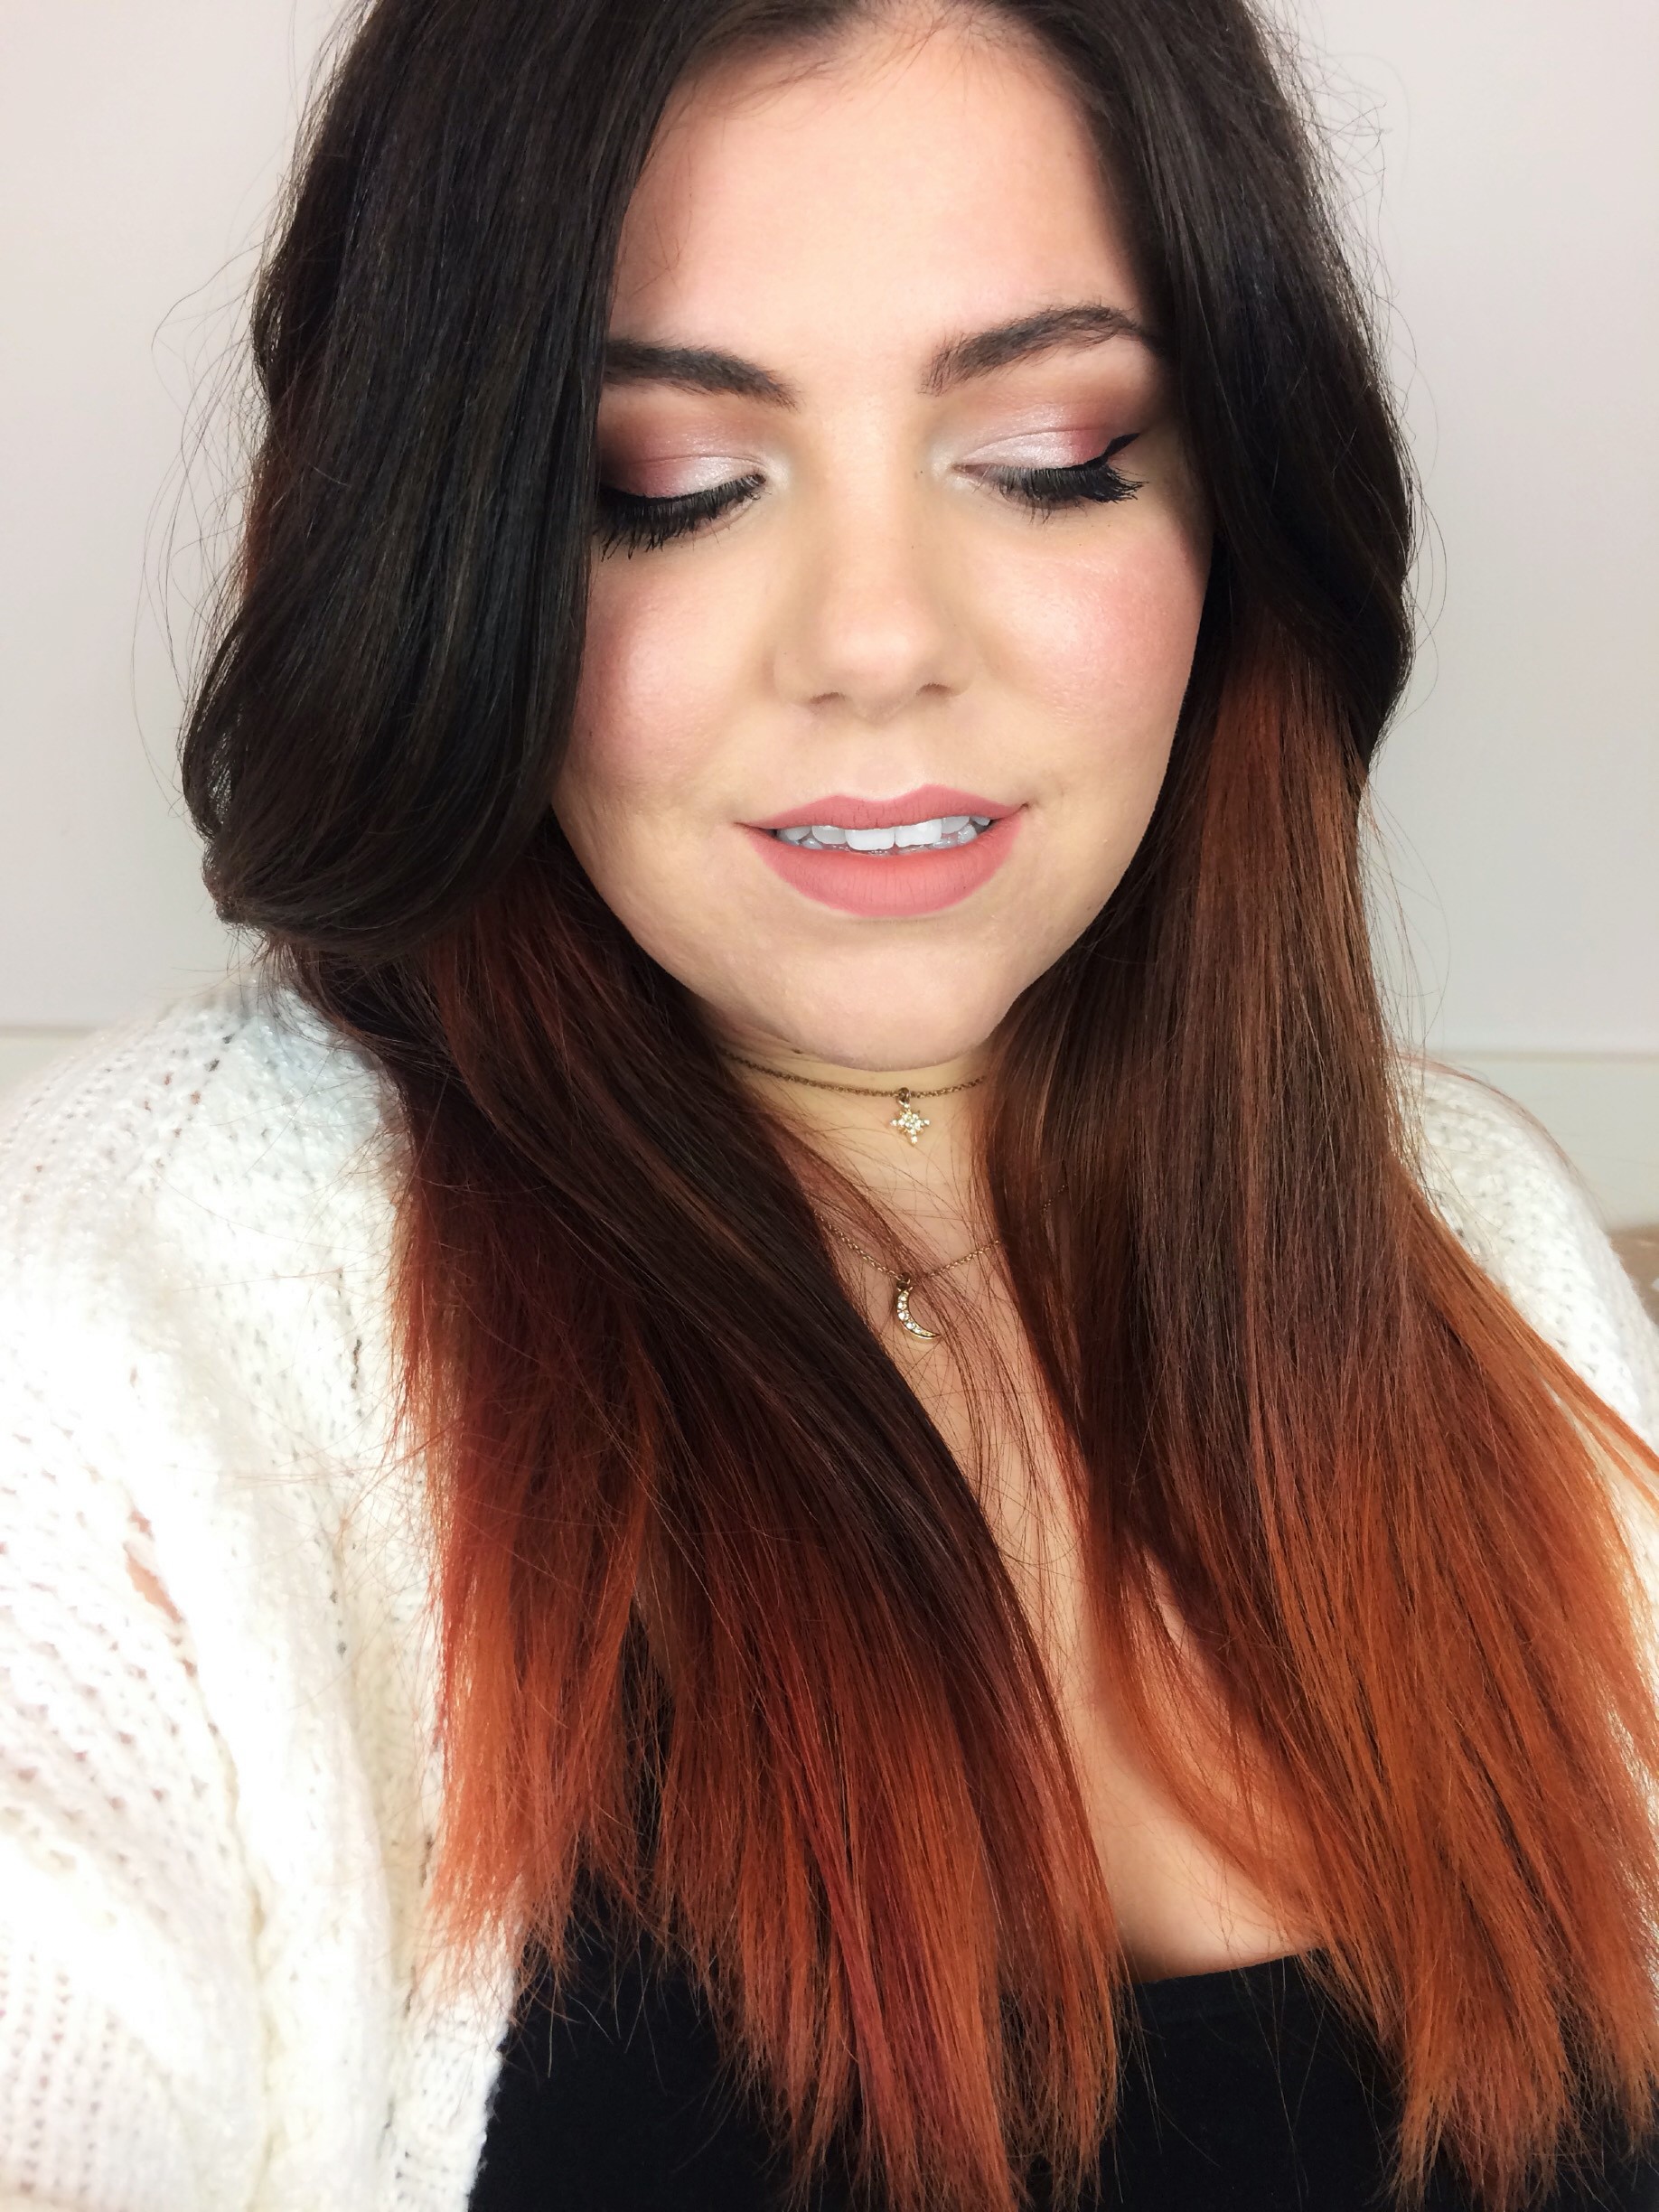 Cool toned smokey eye with a pop of red using the Anastasia Modern Renaissance Palette [Click to read more]